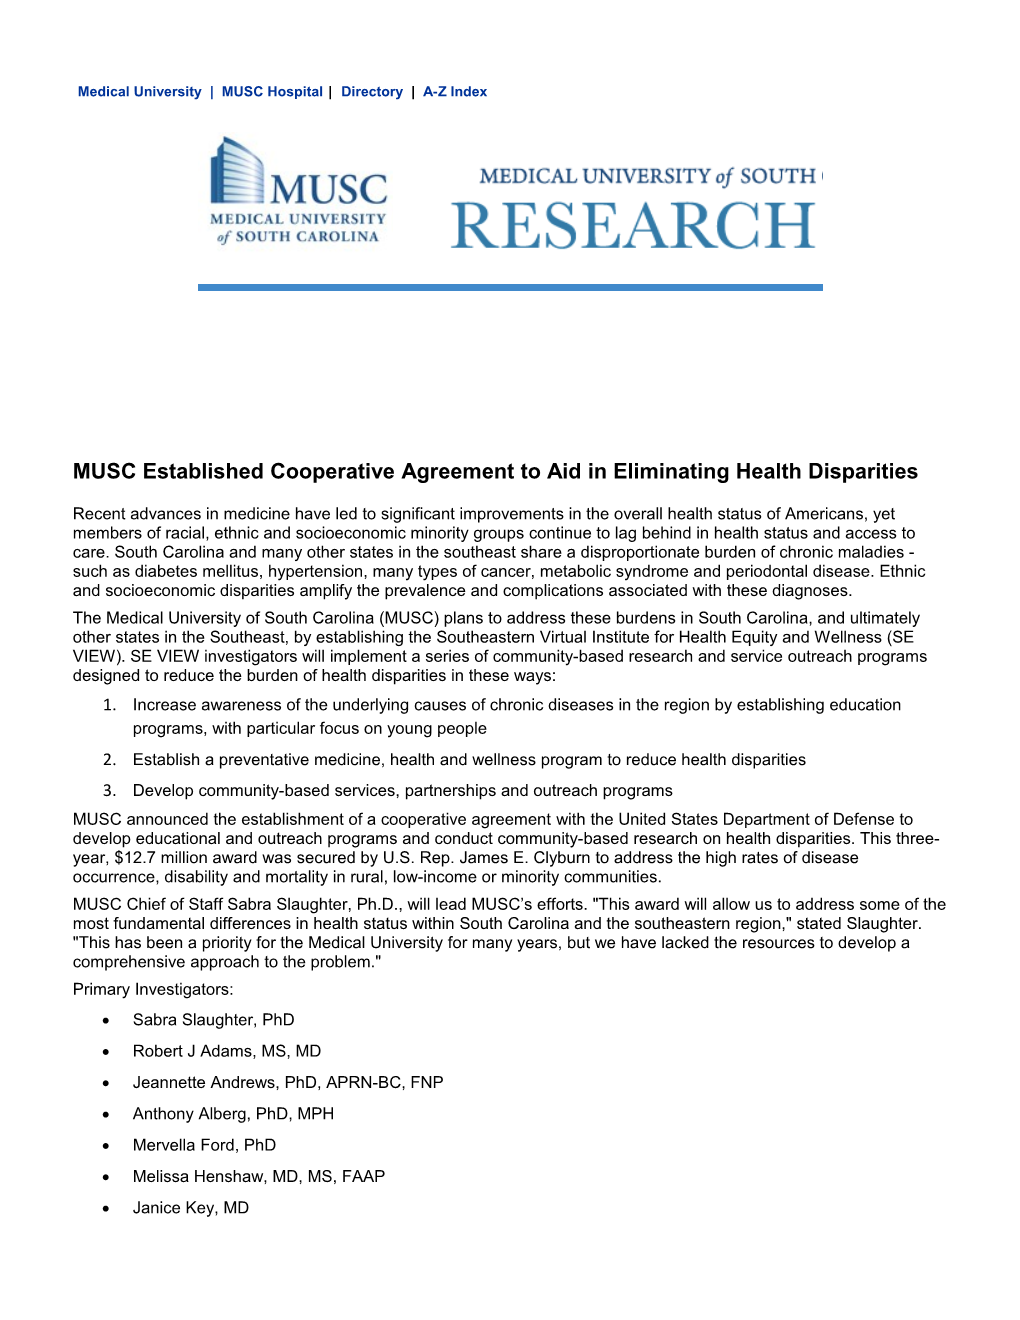 MUSC Established Cooperative Agreement to Aid in Eliminating Health Disparities